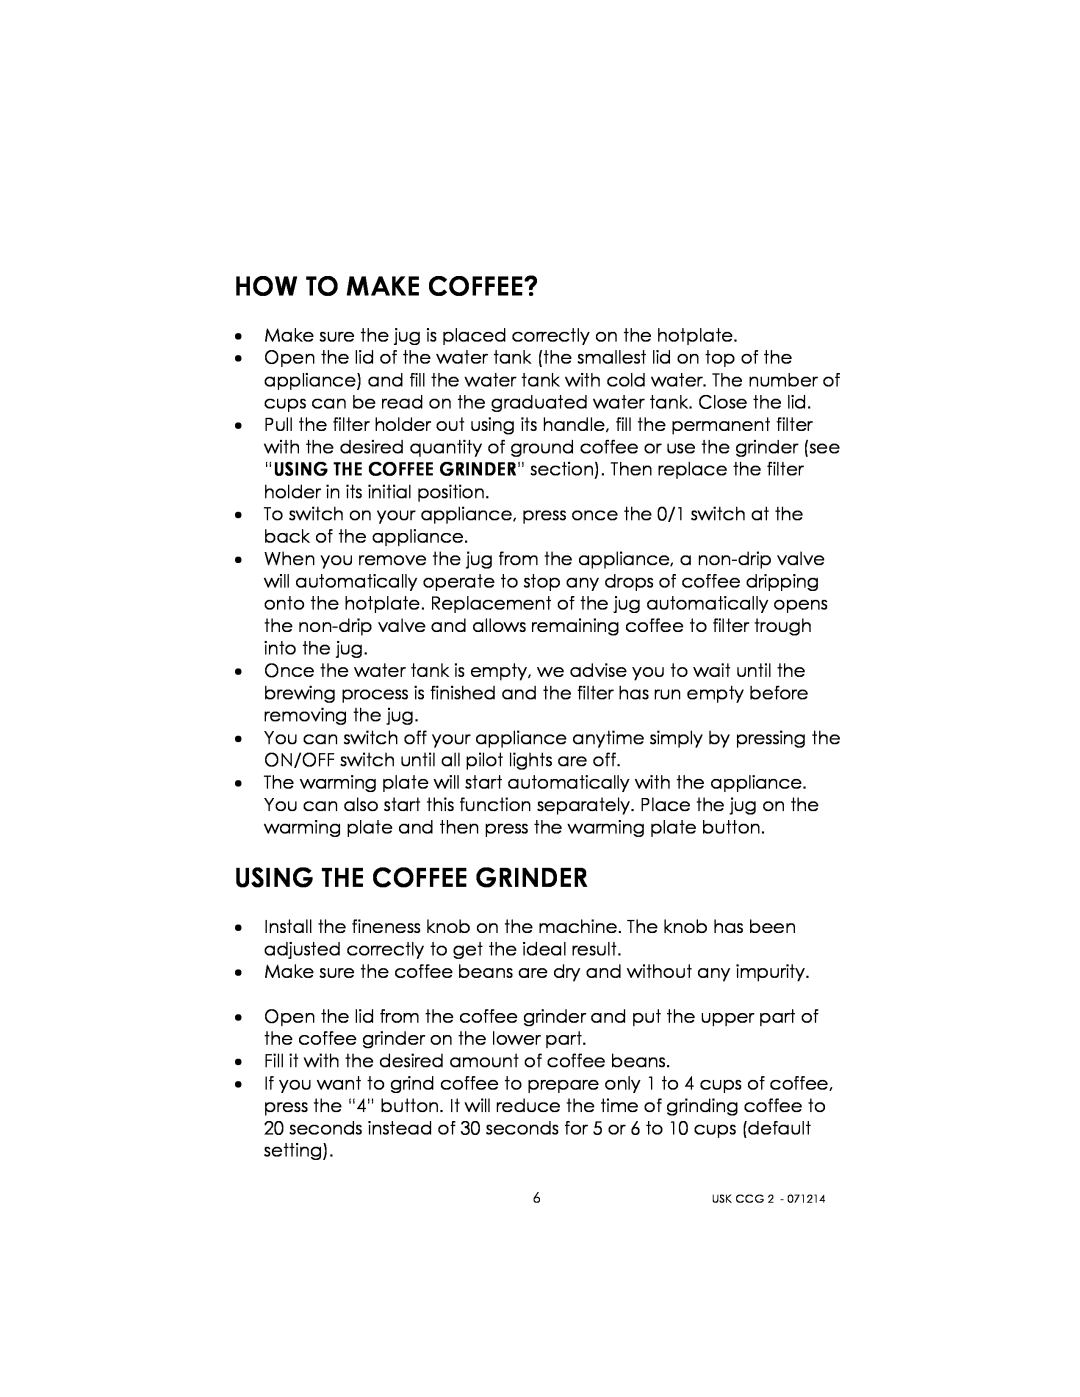 Kalorik USK CCG 2 manual How To Make Coffee?, Using The Coffee Grinder 